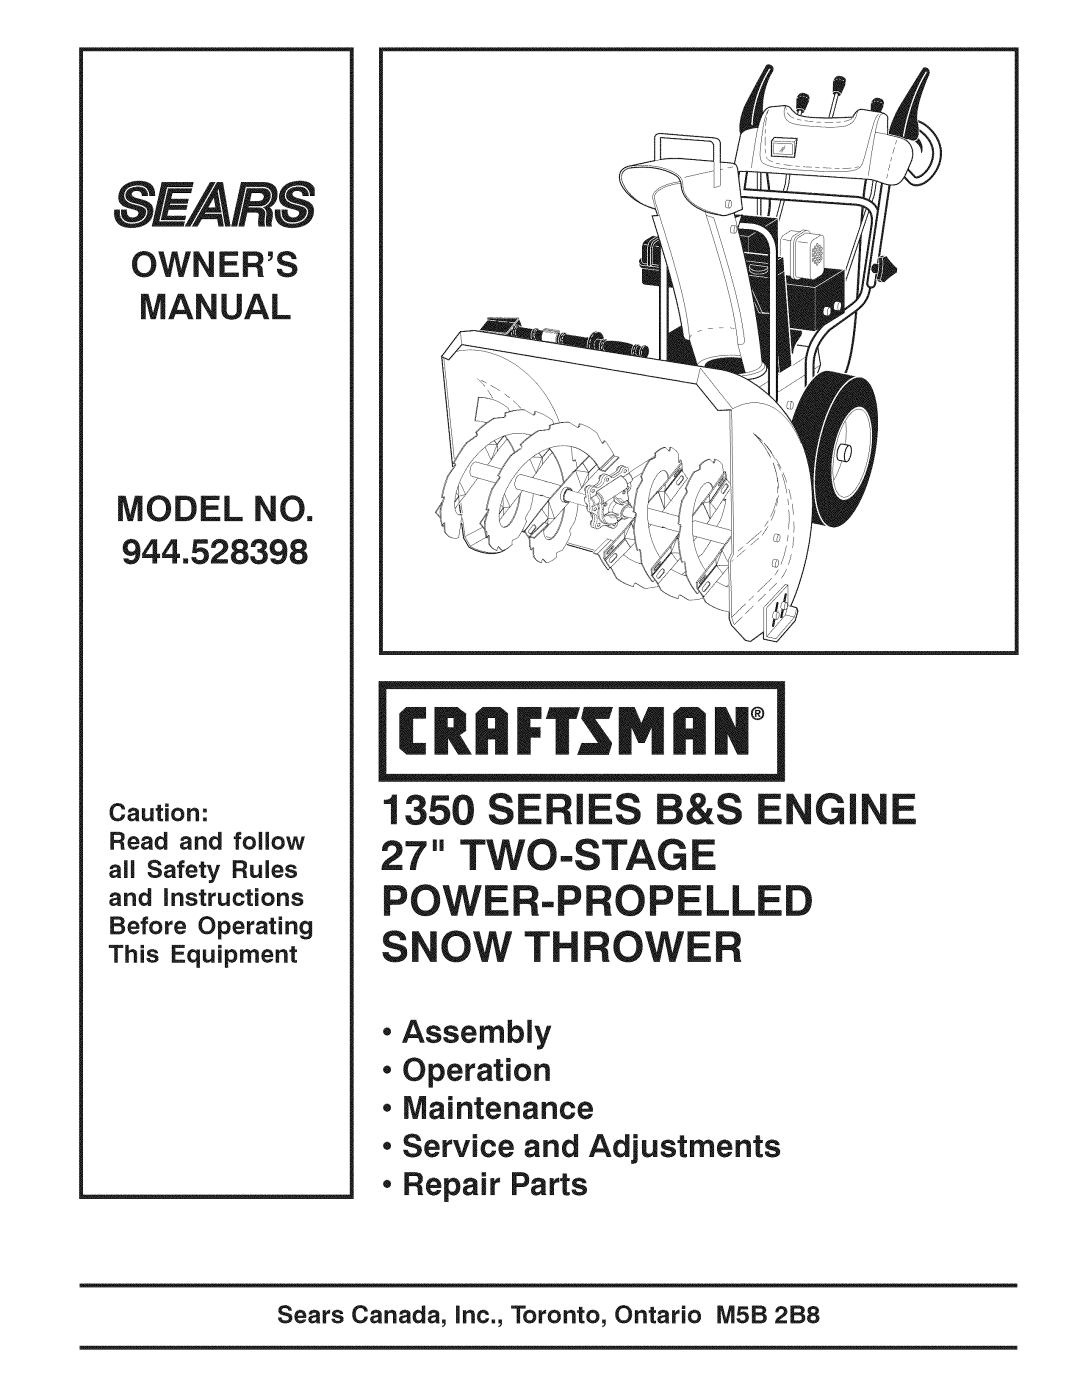 Craftsman 944.528398 owner manual Se Ies E E, Two-Stage, Powe -P Elle, Ow Th, all Safety Rules and instructions, Owners 